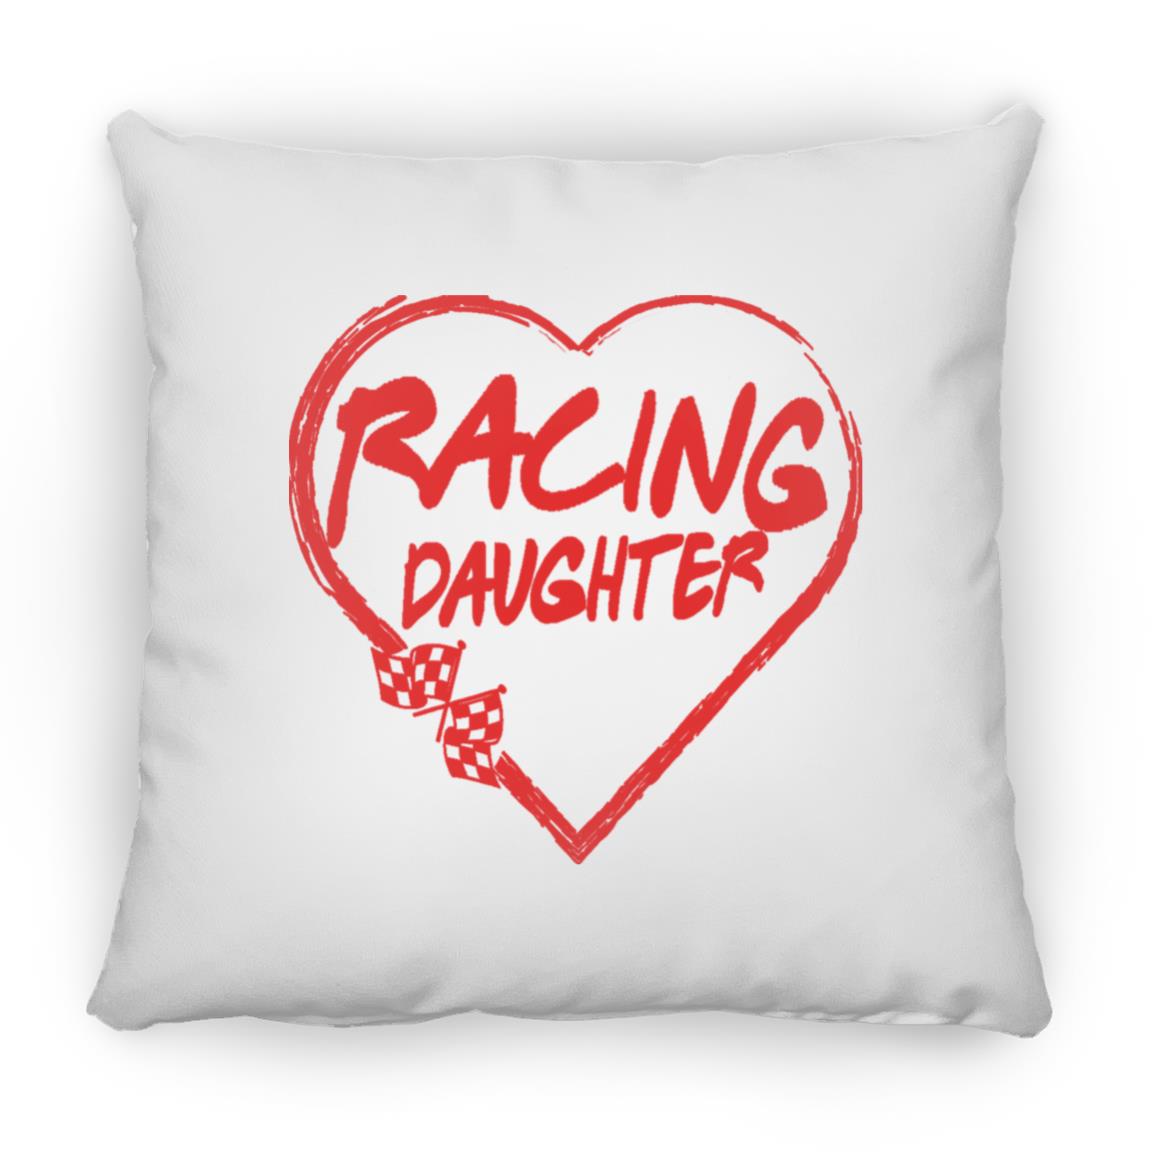 Racing Daughter Heart Small Square Pillow